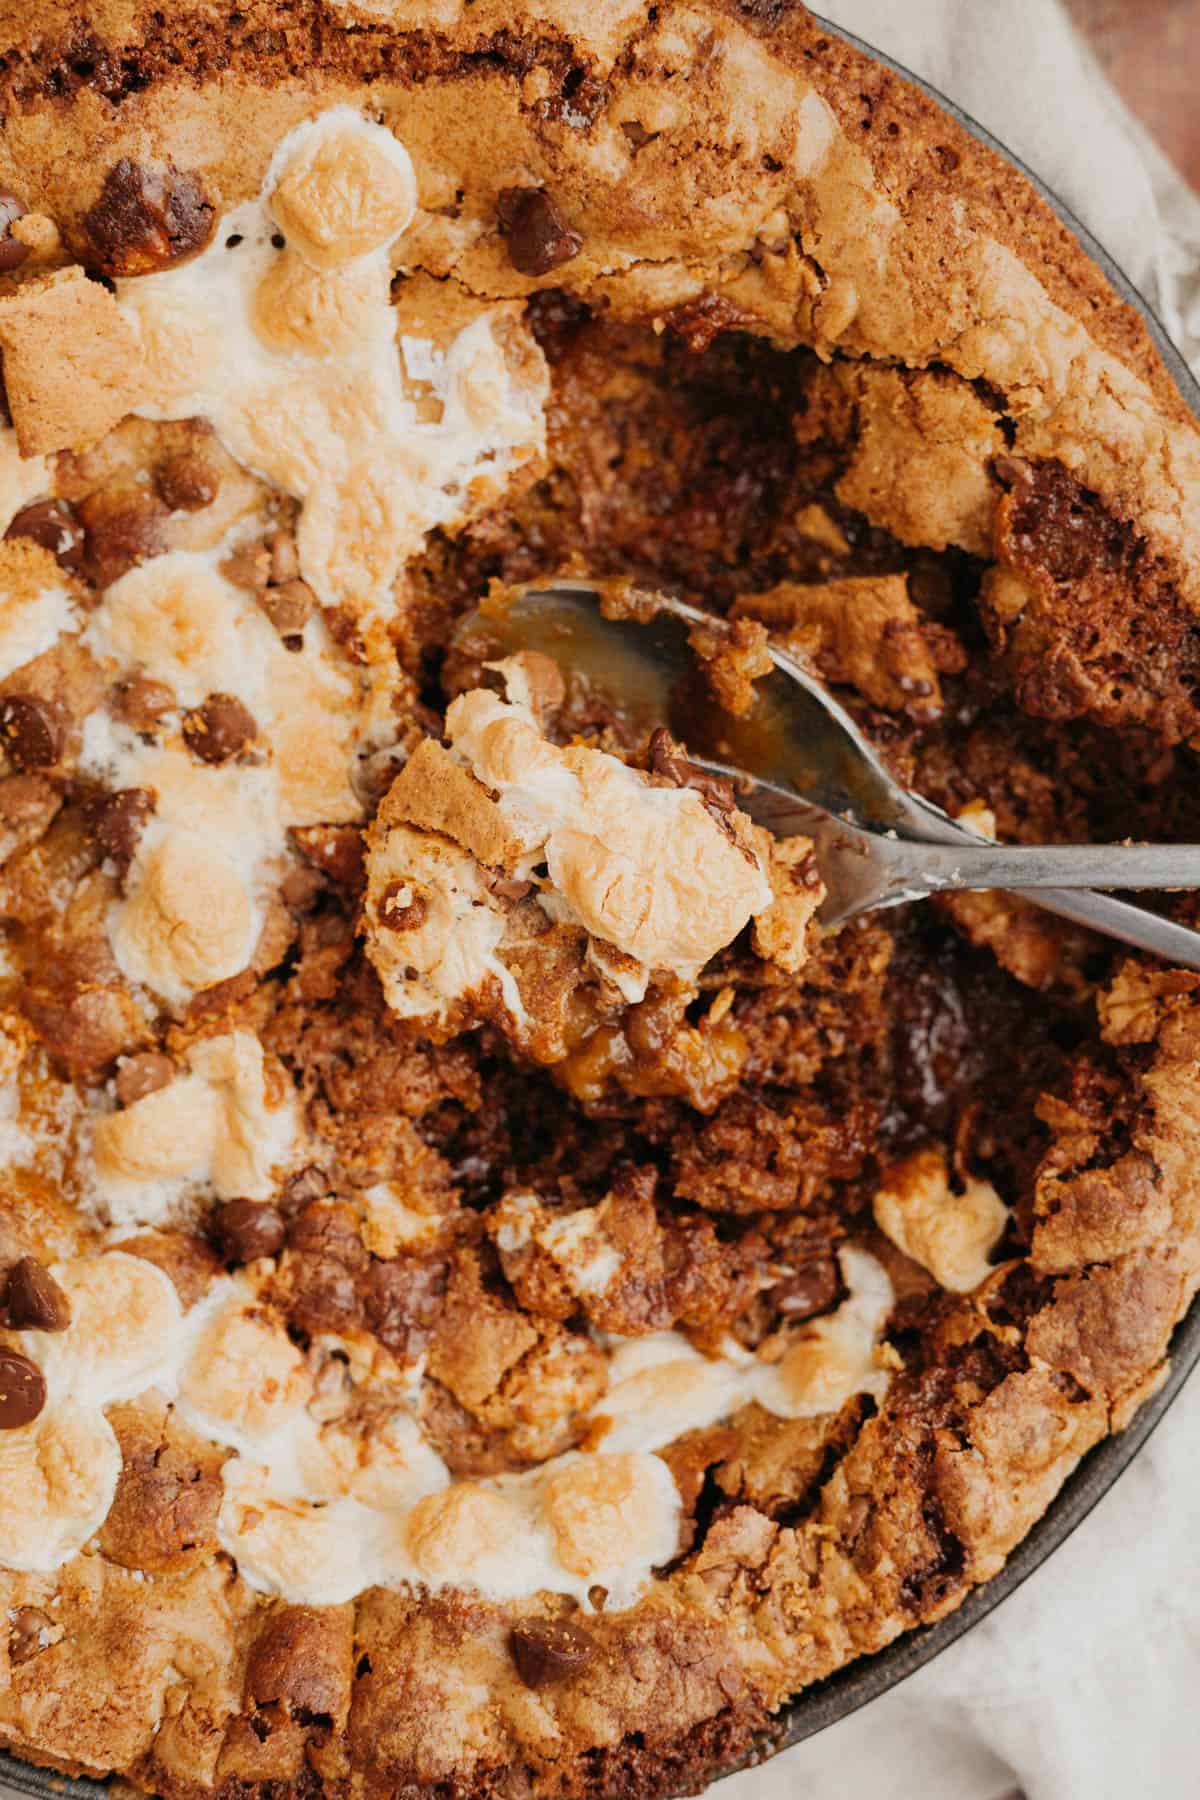 A close up of a marshmallow cookie skillet, there is a spoon scooping out some of the cookie.